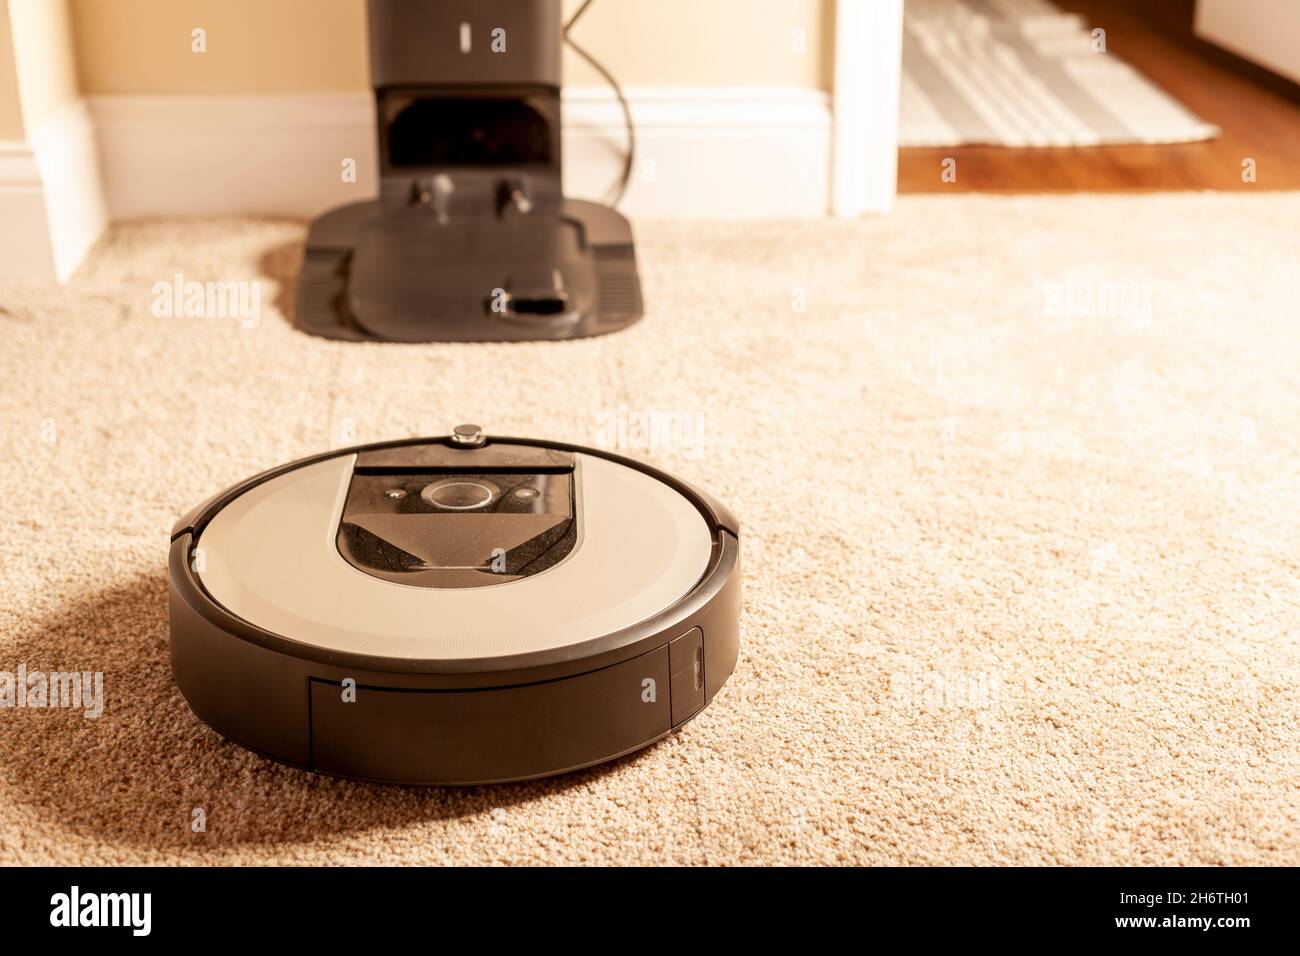 Close up generic image for robot vacuum cleaner. This unit is operating on carpetted floor and heading towards its base station for charging and empty Stock Photo